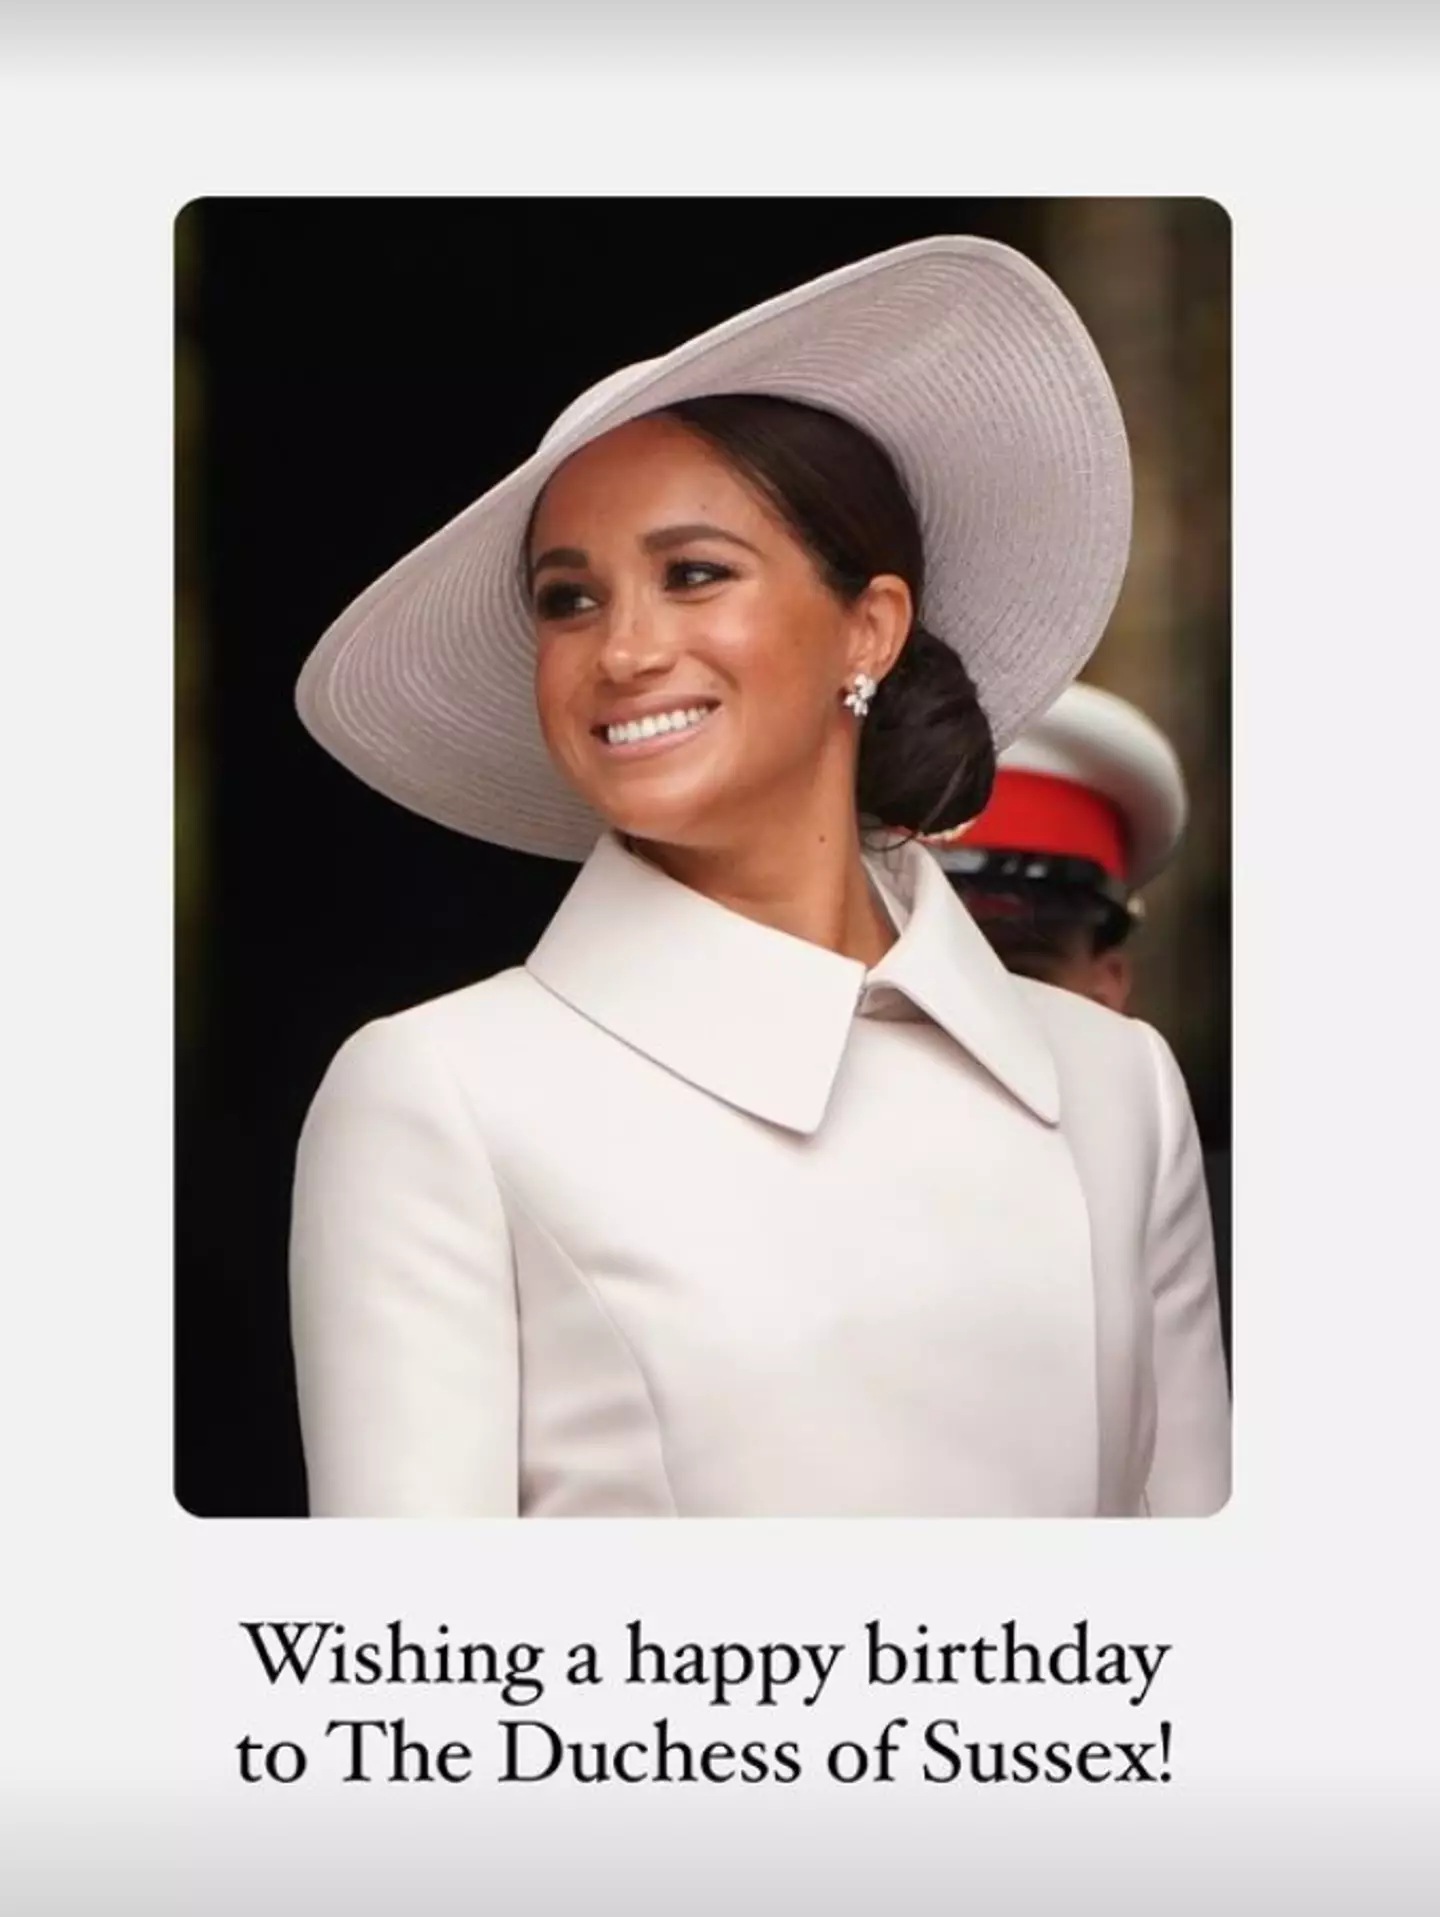 The birthday snap showed the Duchess of Sussex during the Platinum Jubilee weekend in June.